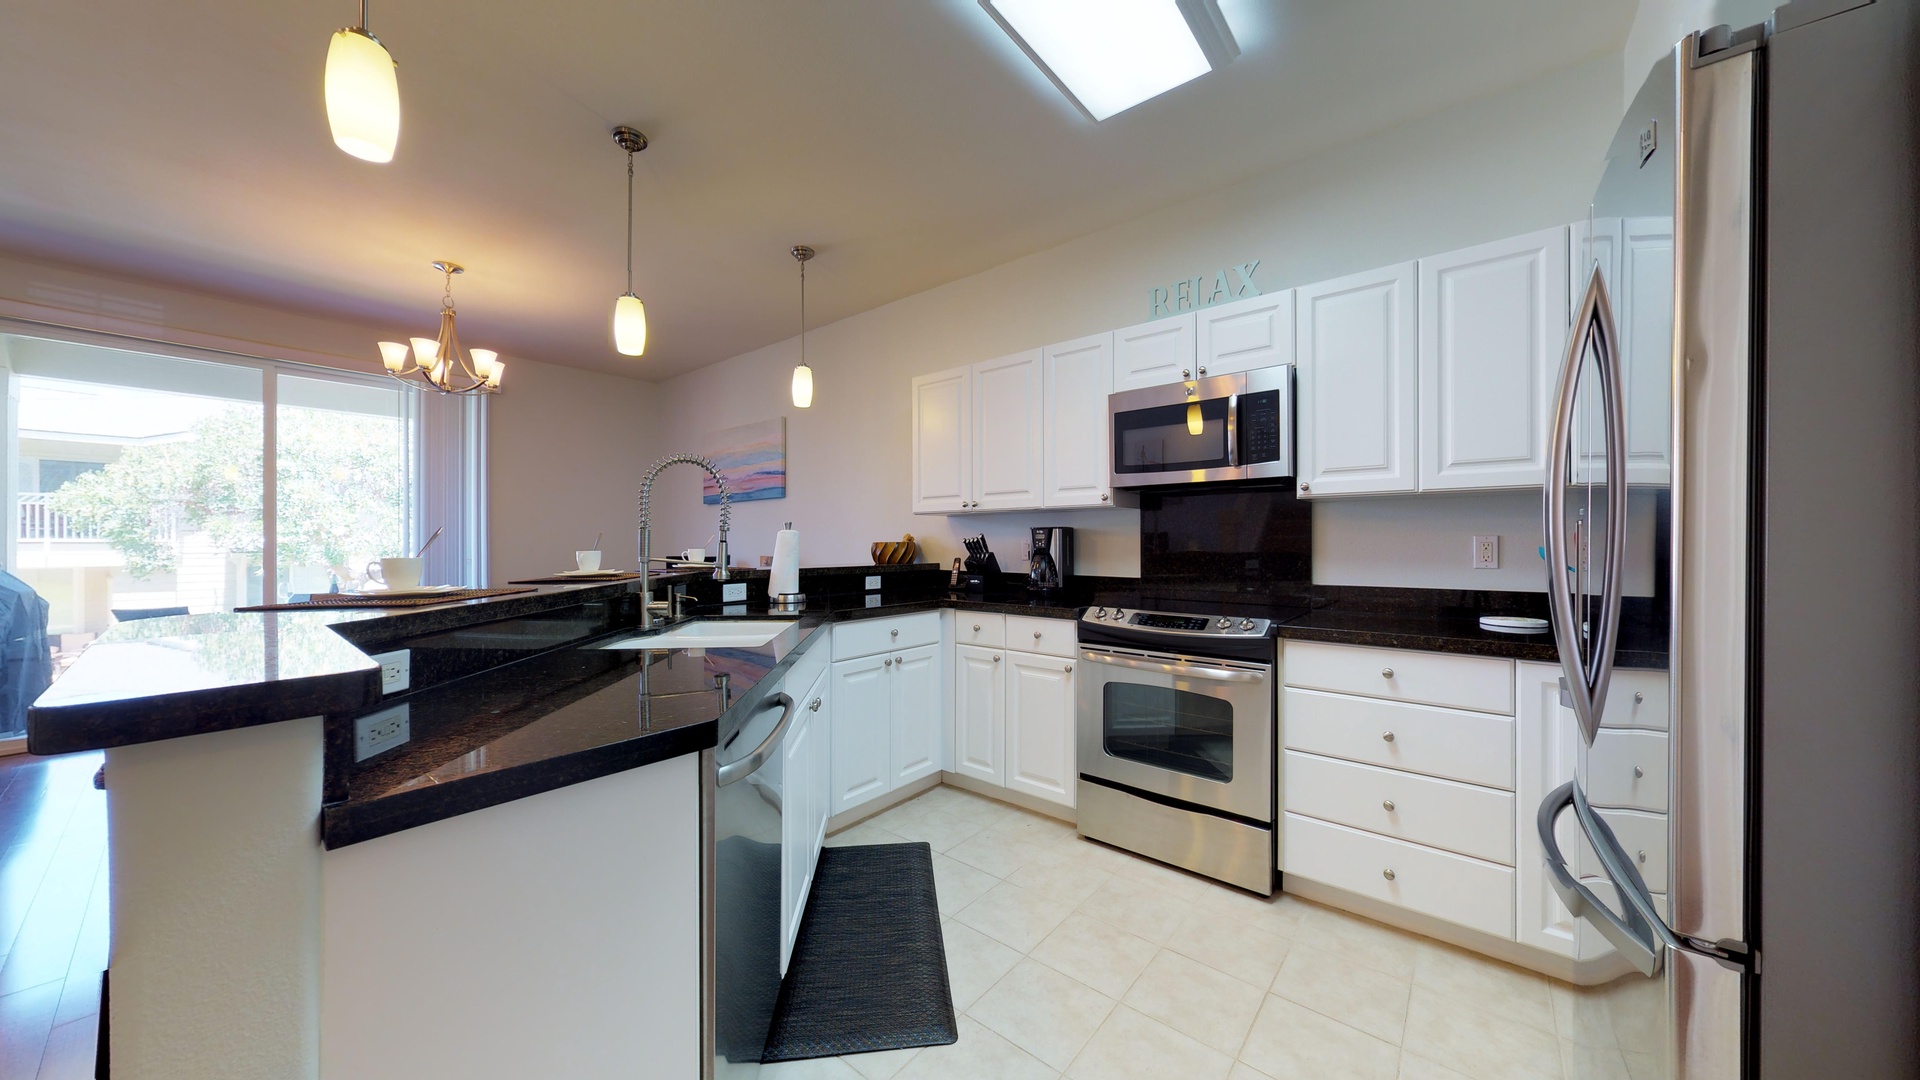 Kapolei Vacation Rentals, Ko Olina Kai 1035D - The kitchen is equipped with stainless steel appliances for your culinary adventurs.